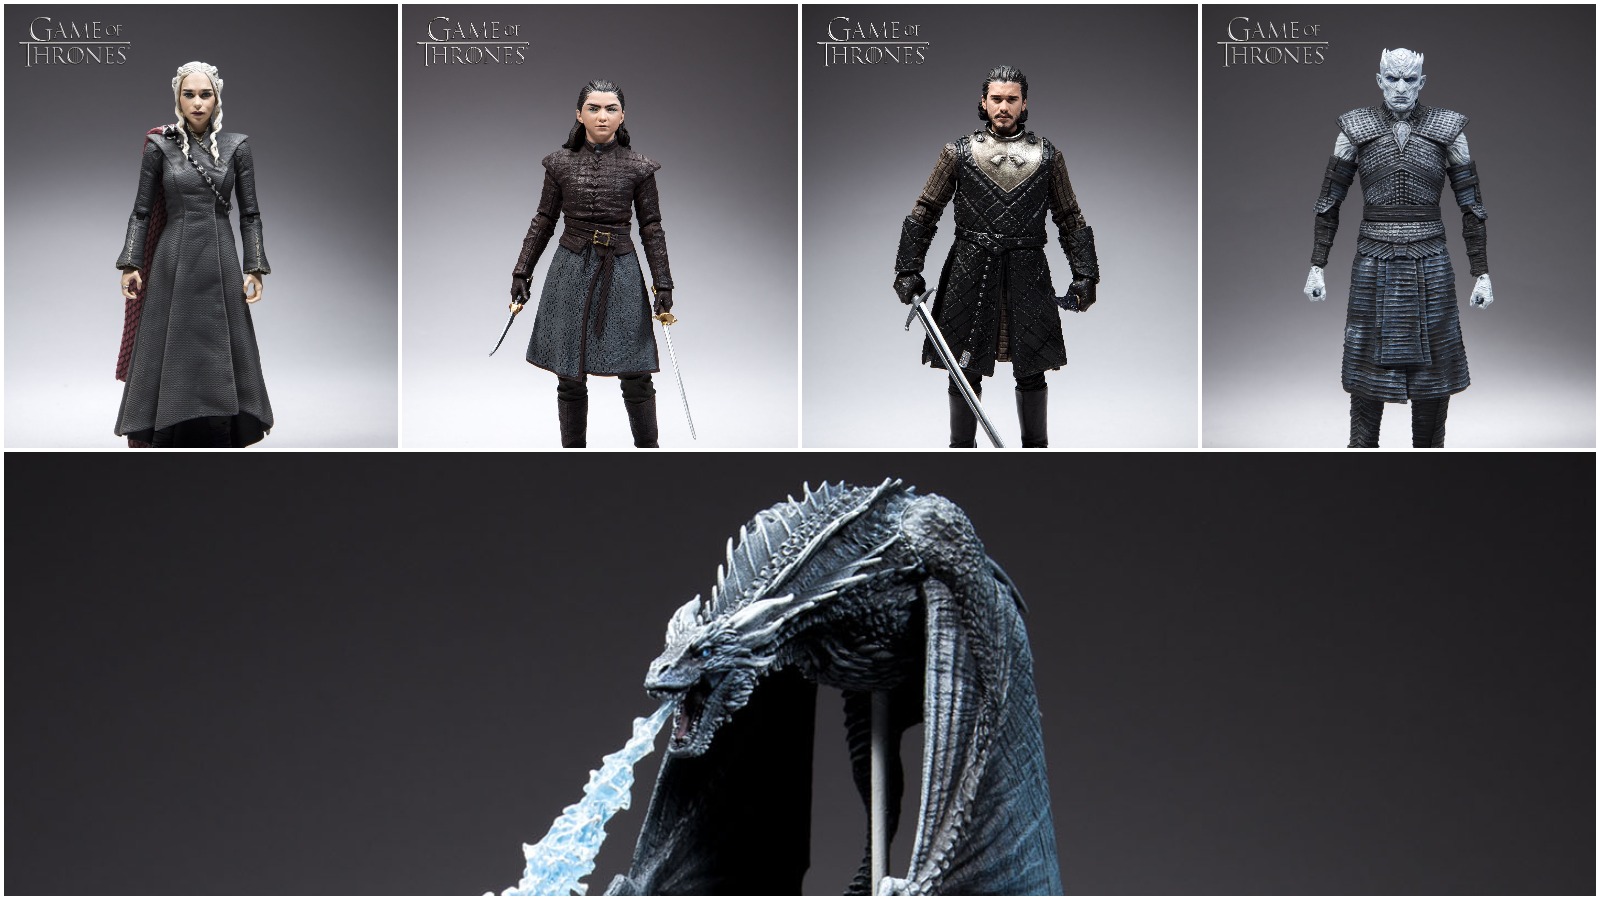 game of thrones action figures mcfarlane toys